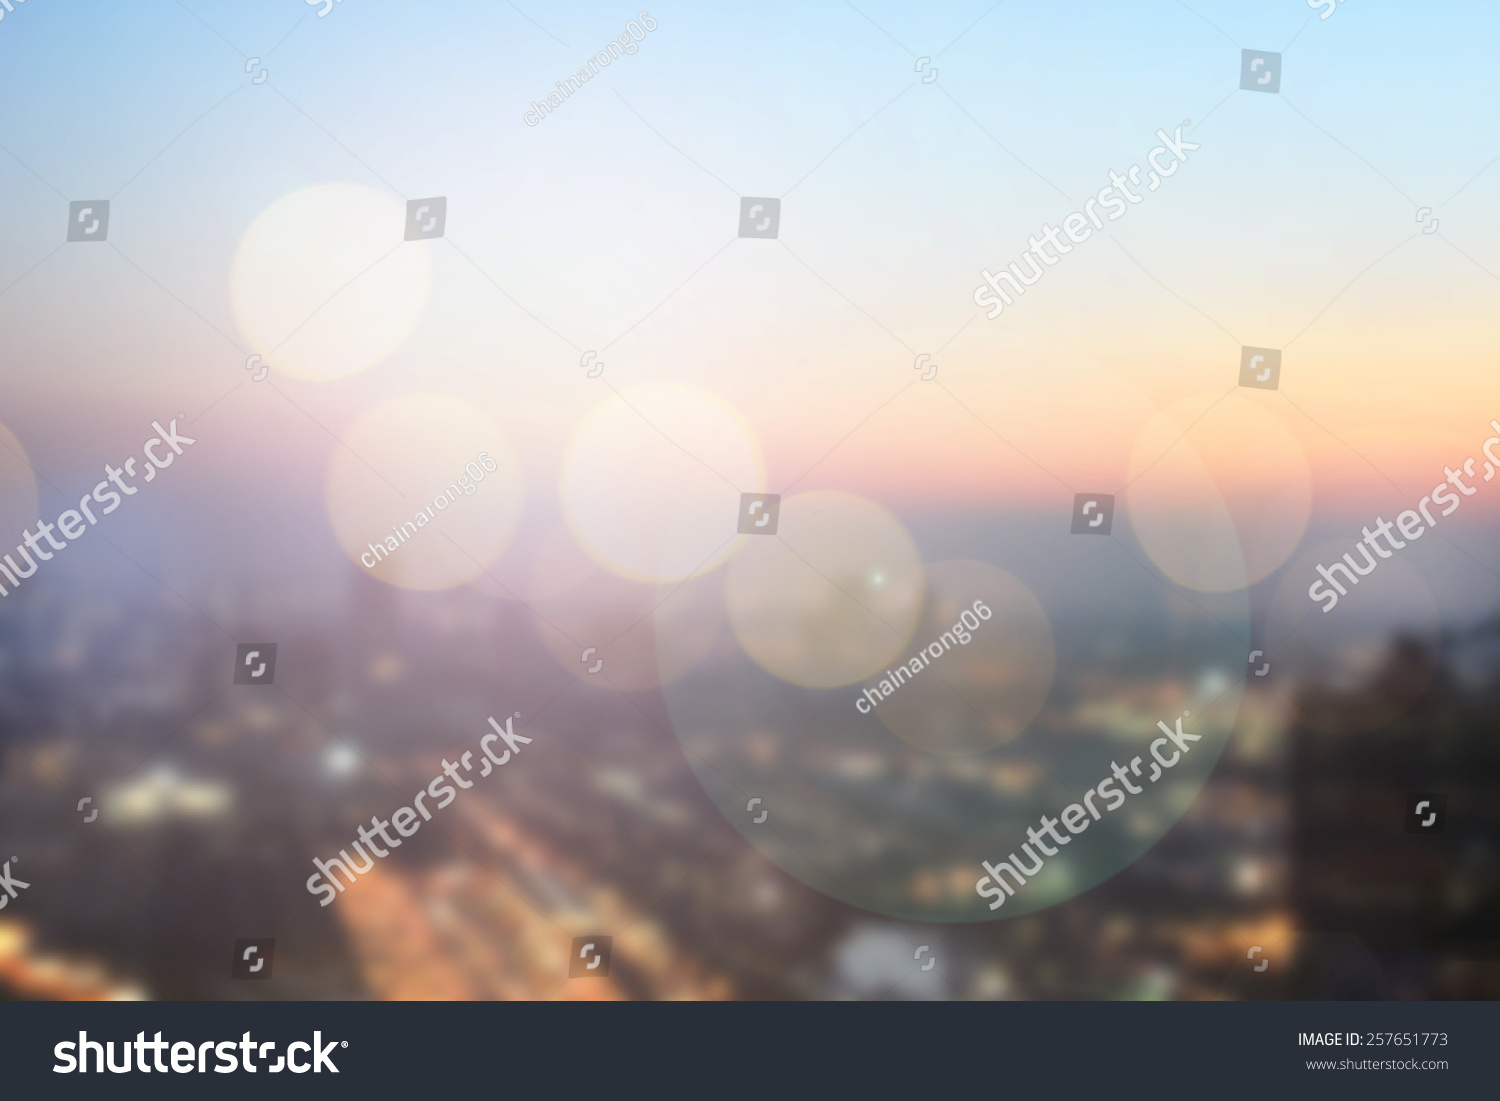 abstract double exposure of blurred sky night city downtown construction with circle round light background with lens flare effect concept. #257651773